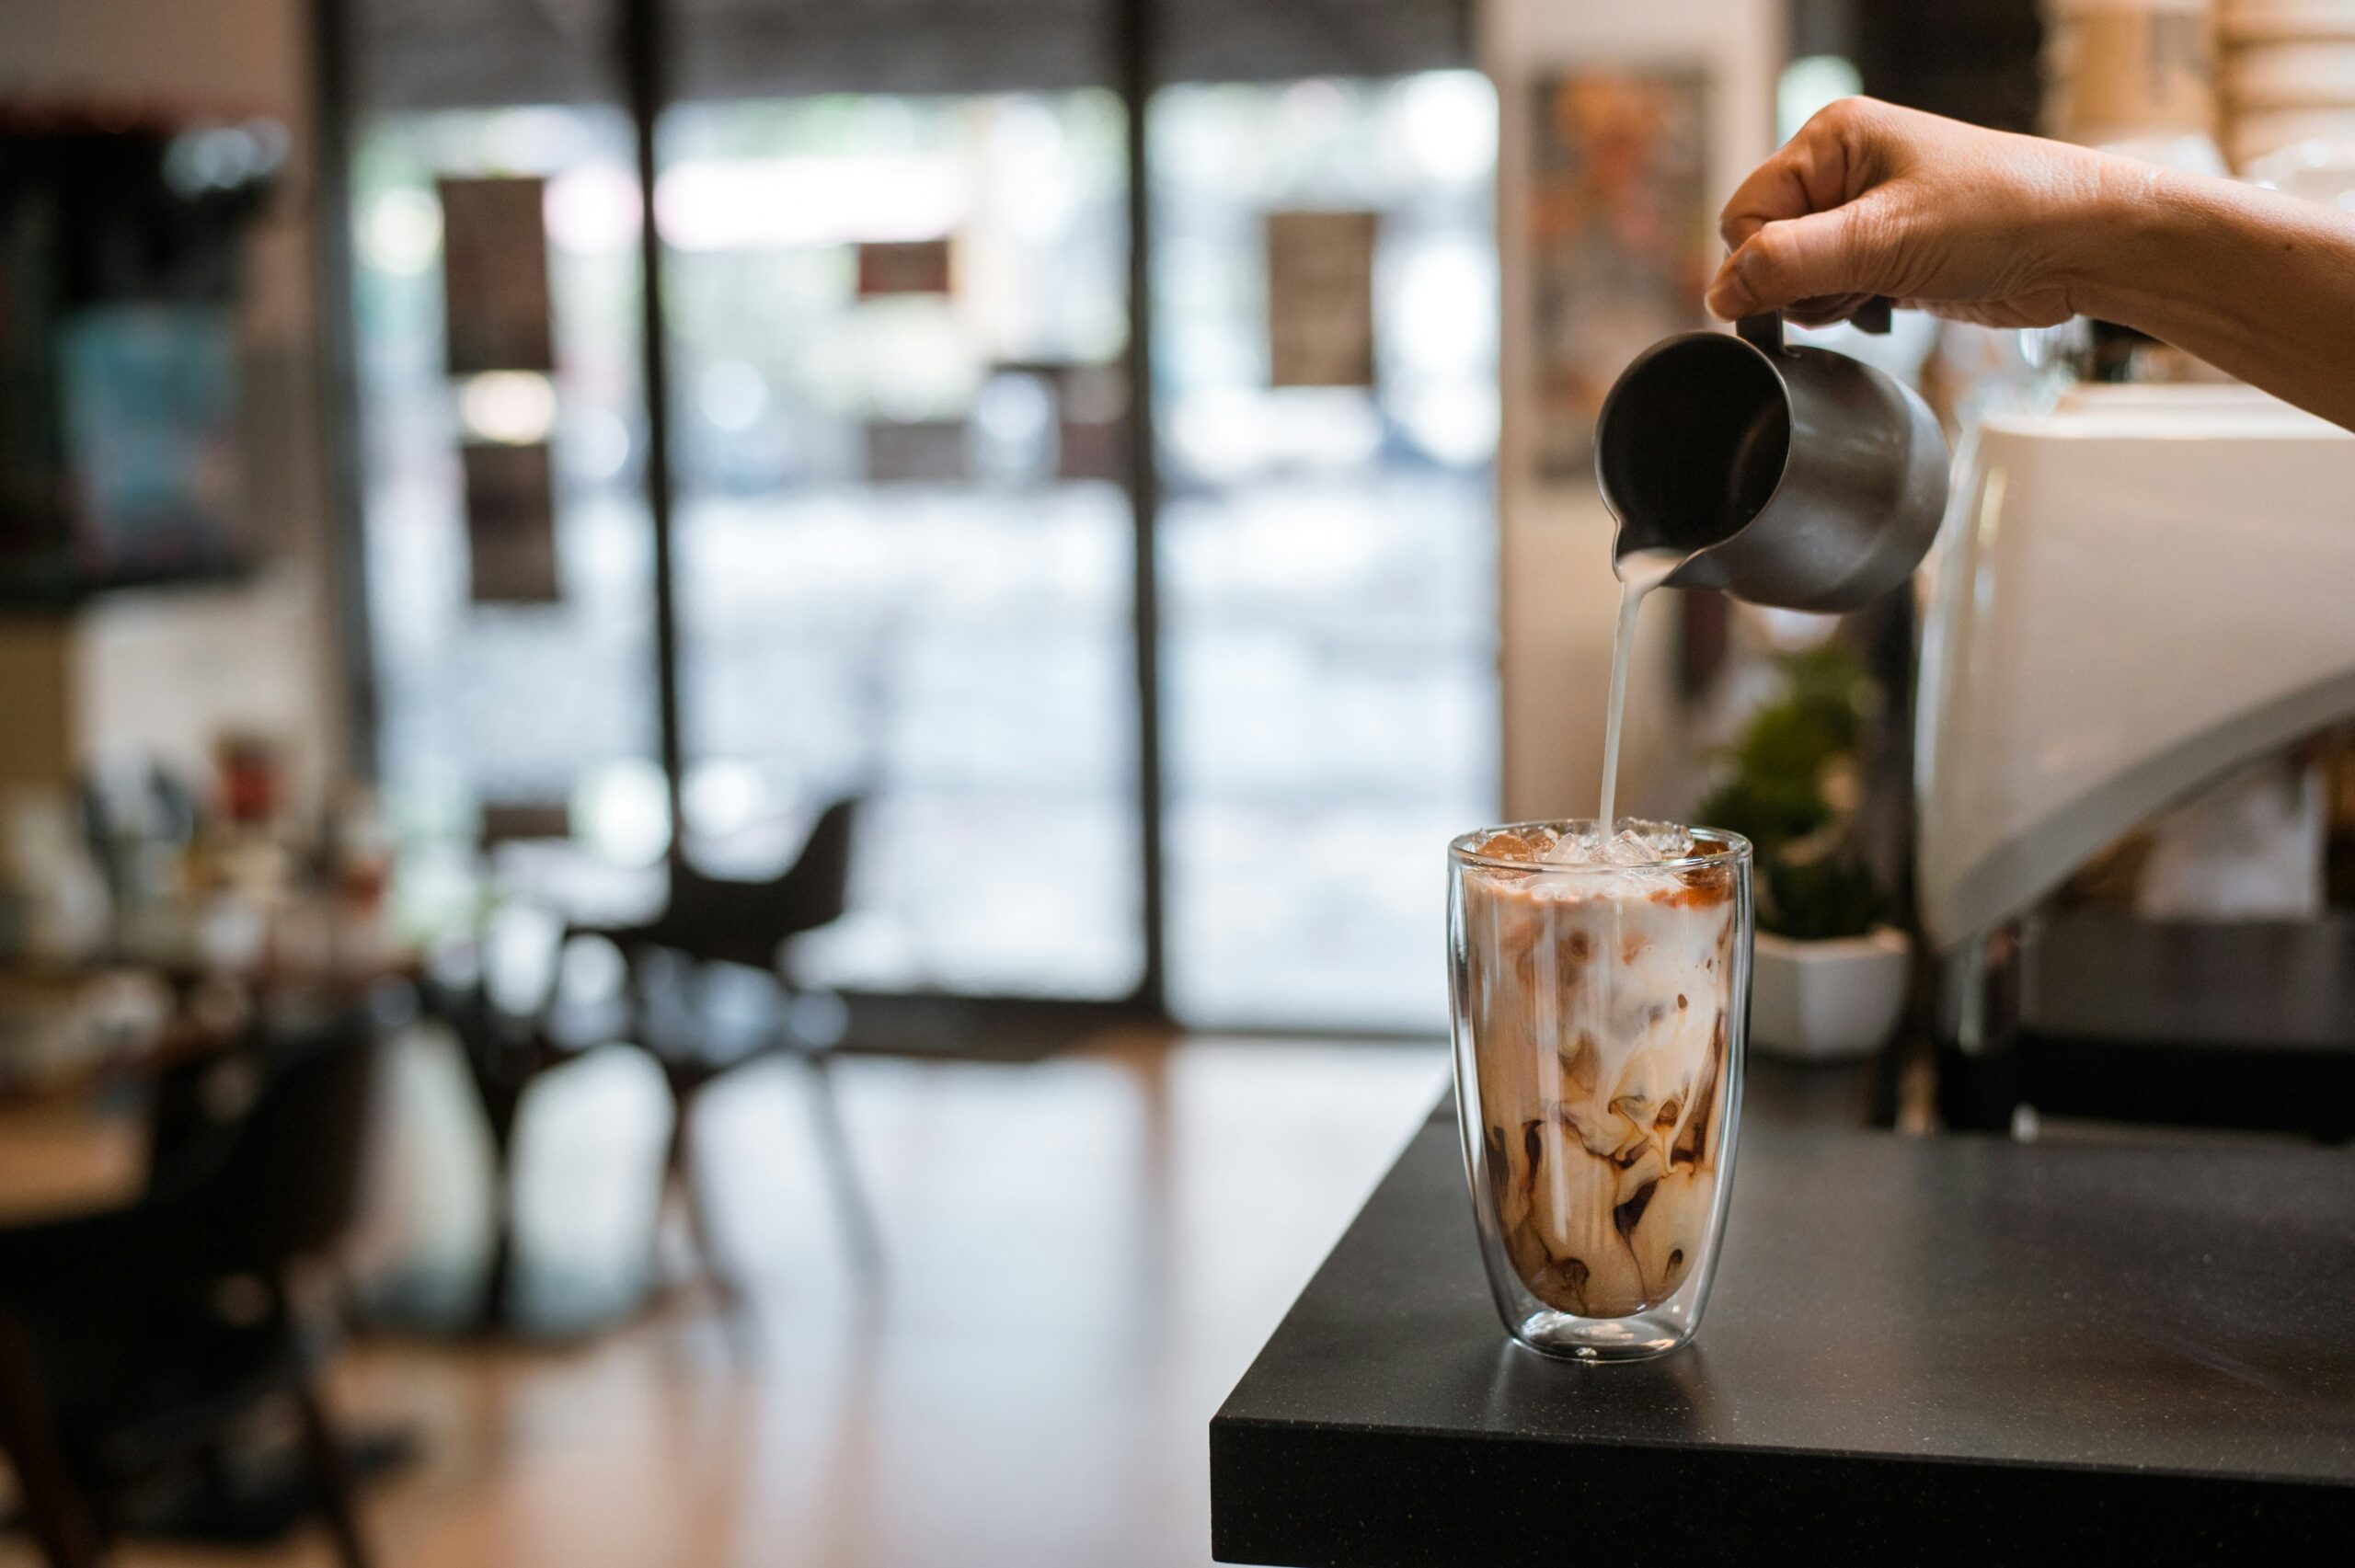 For candy bar fans, the Iced Snickers Nespresso recipe is the best drink. Pictured: An iced latte